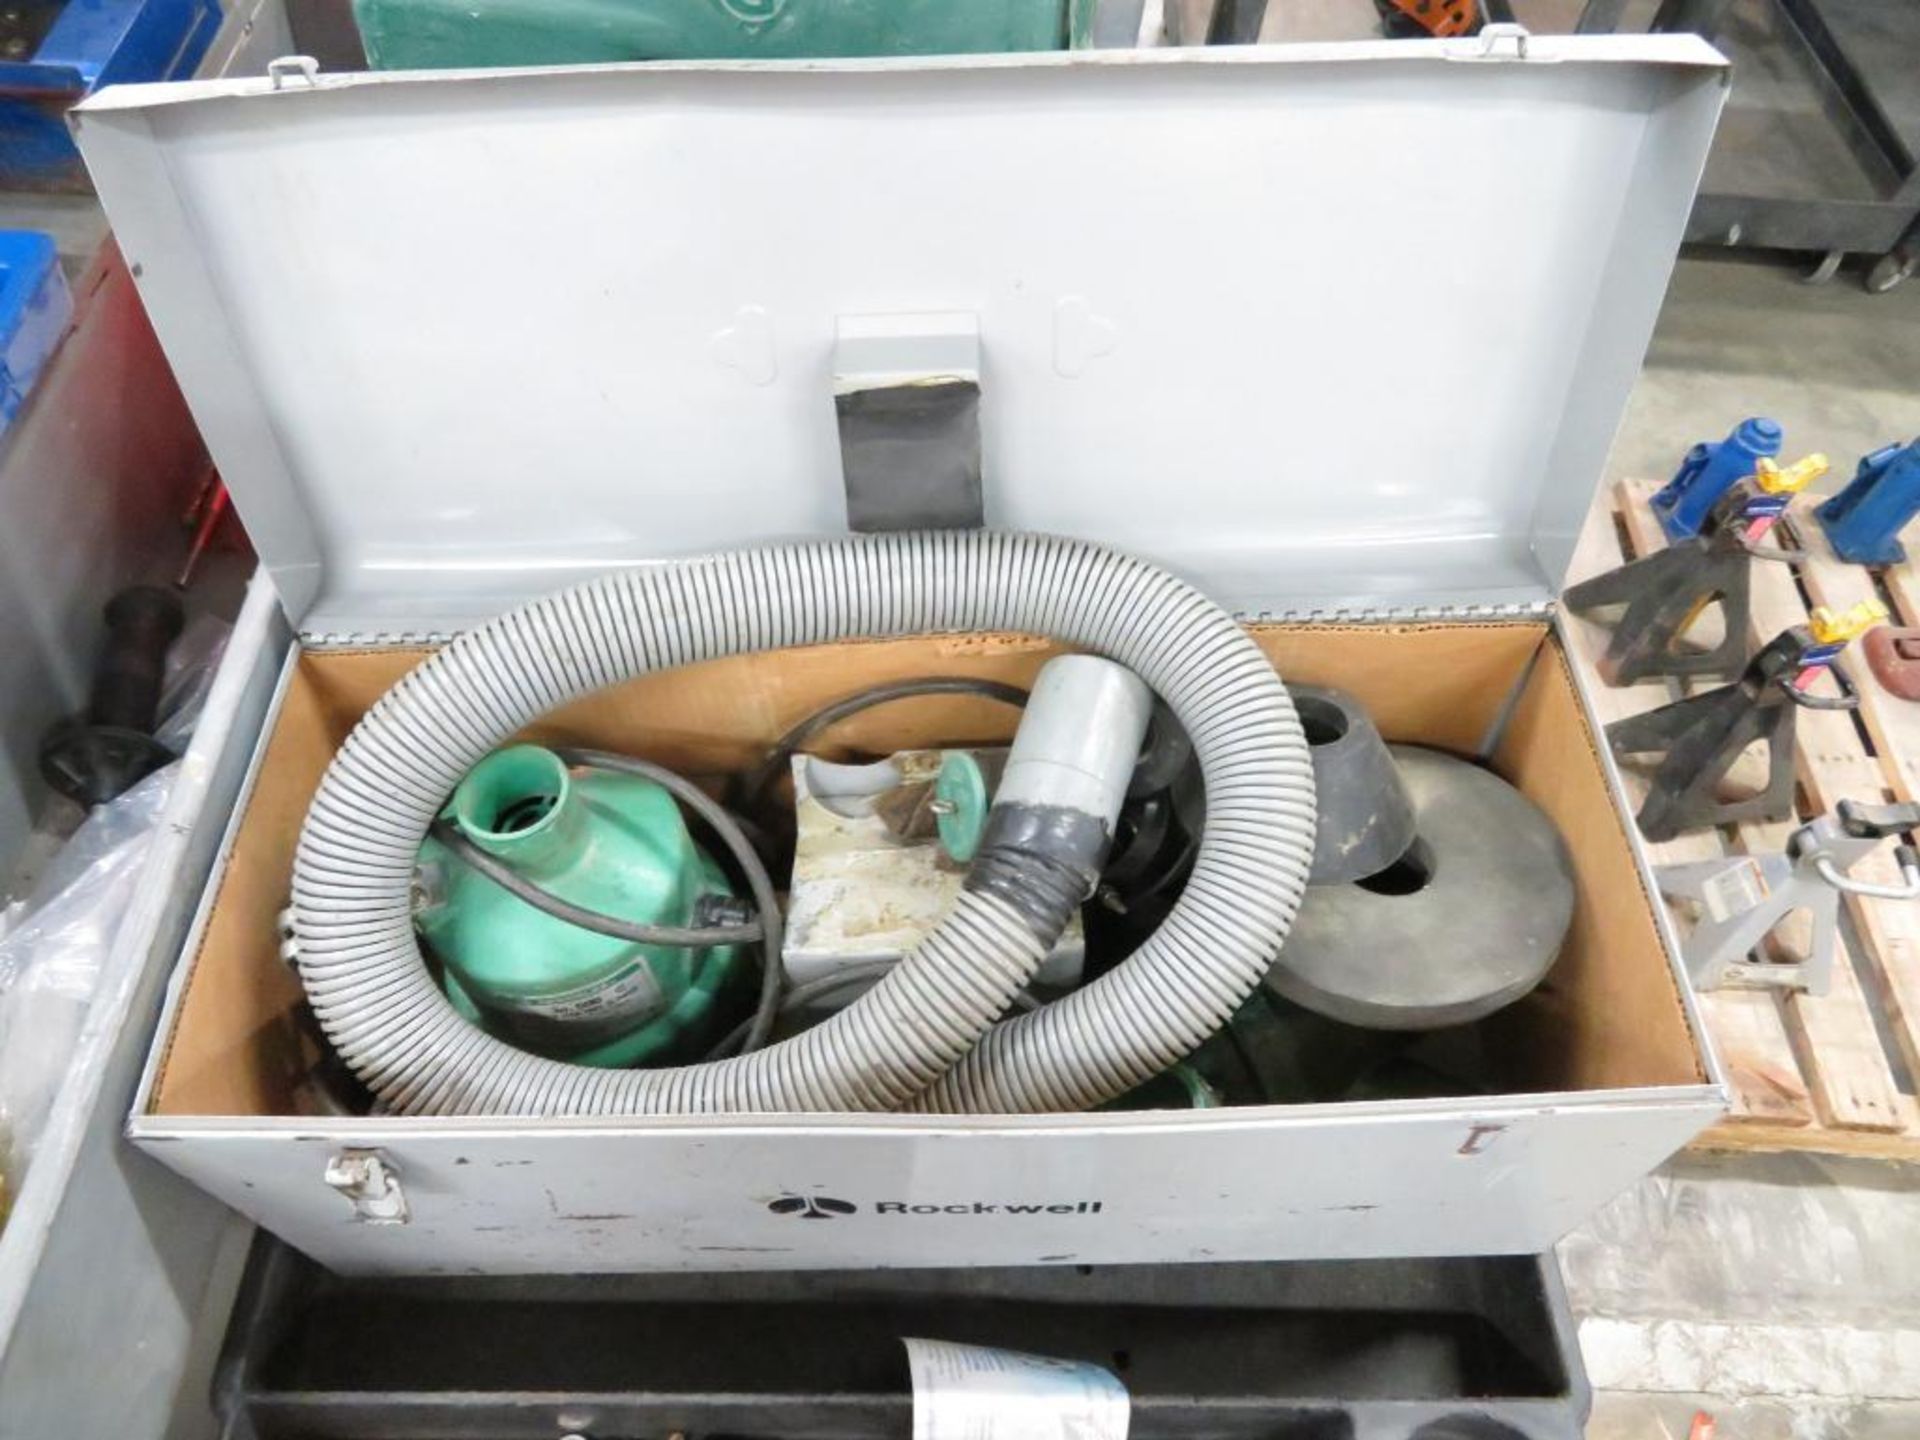 LOT: Greenlee No. 690 Fishing System, Tool Box with Contents, Cart - Image 2 of 3